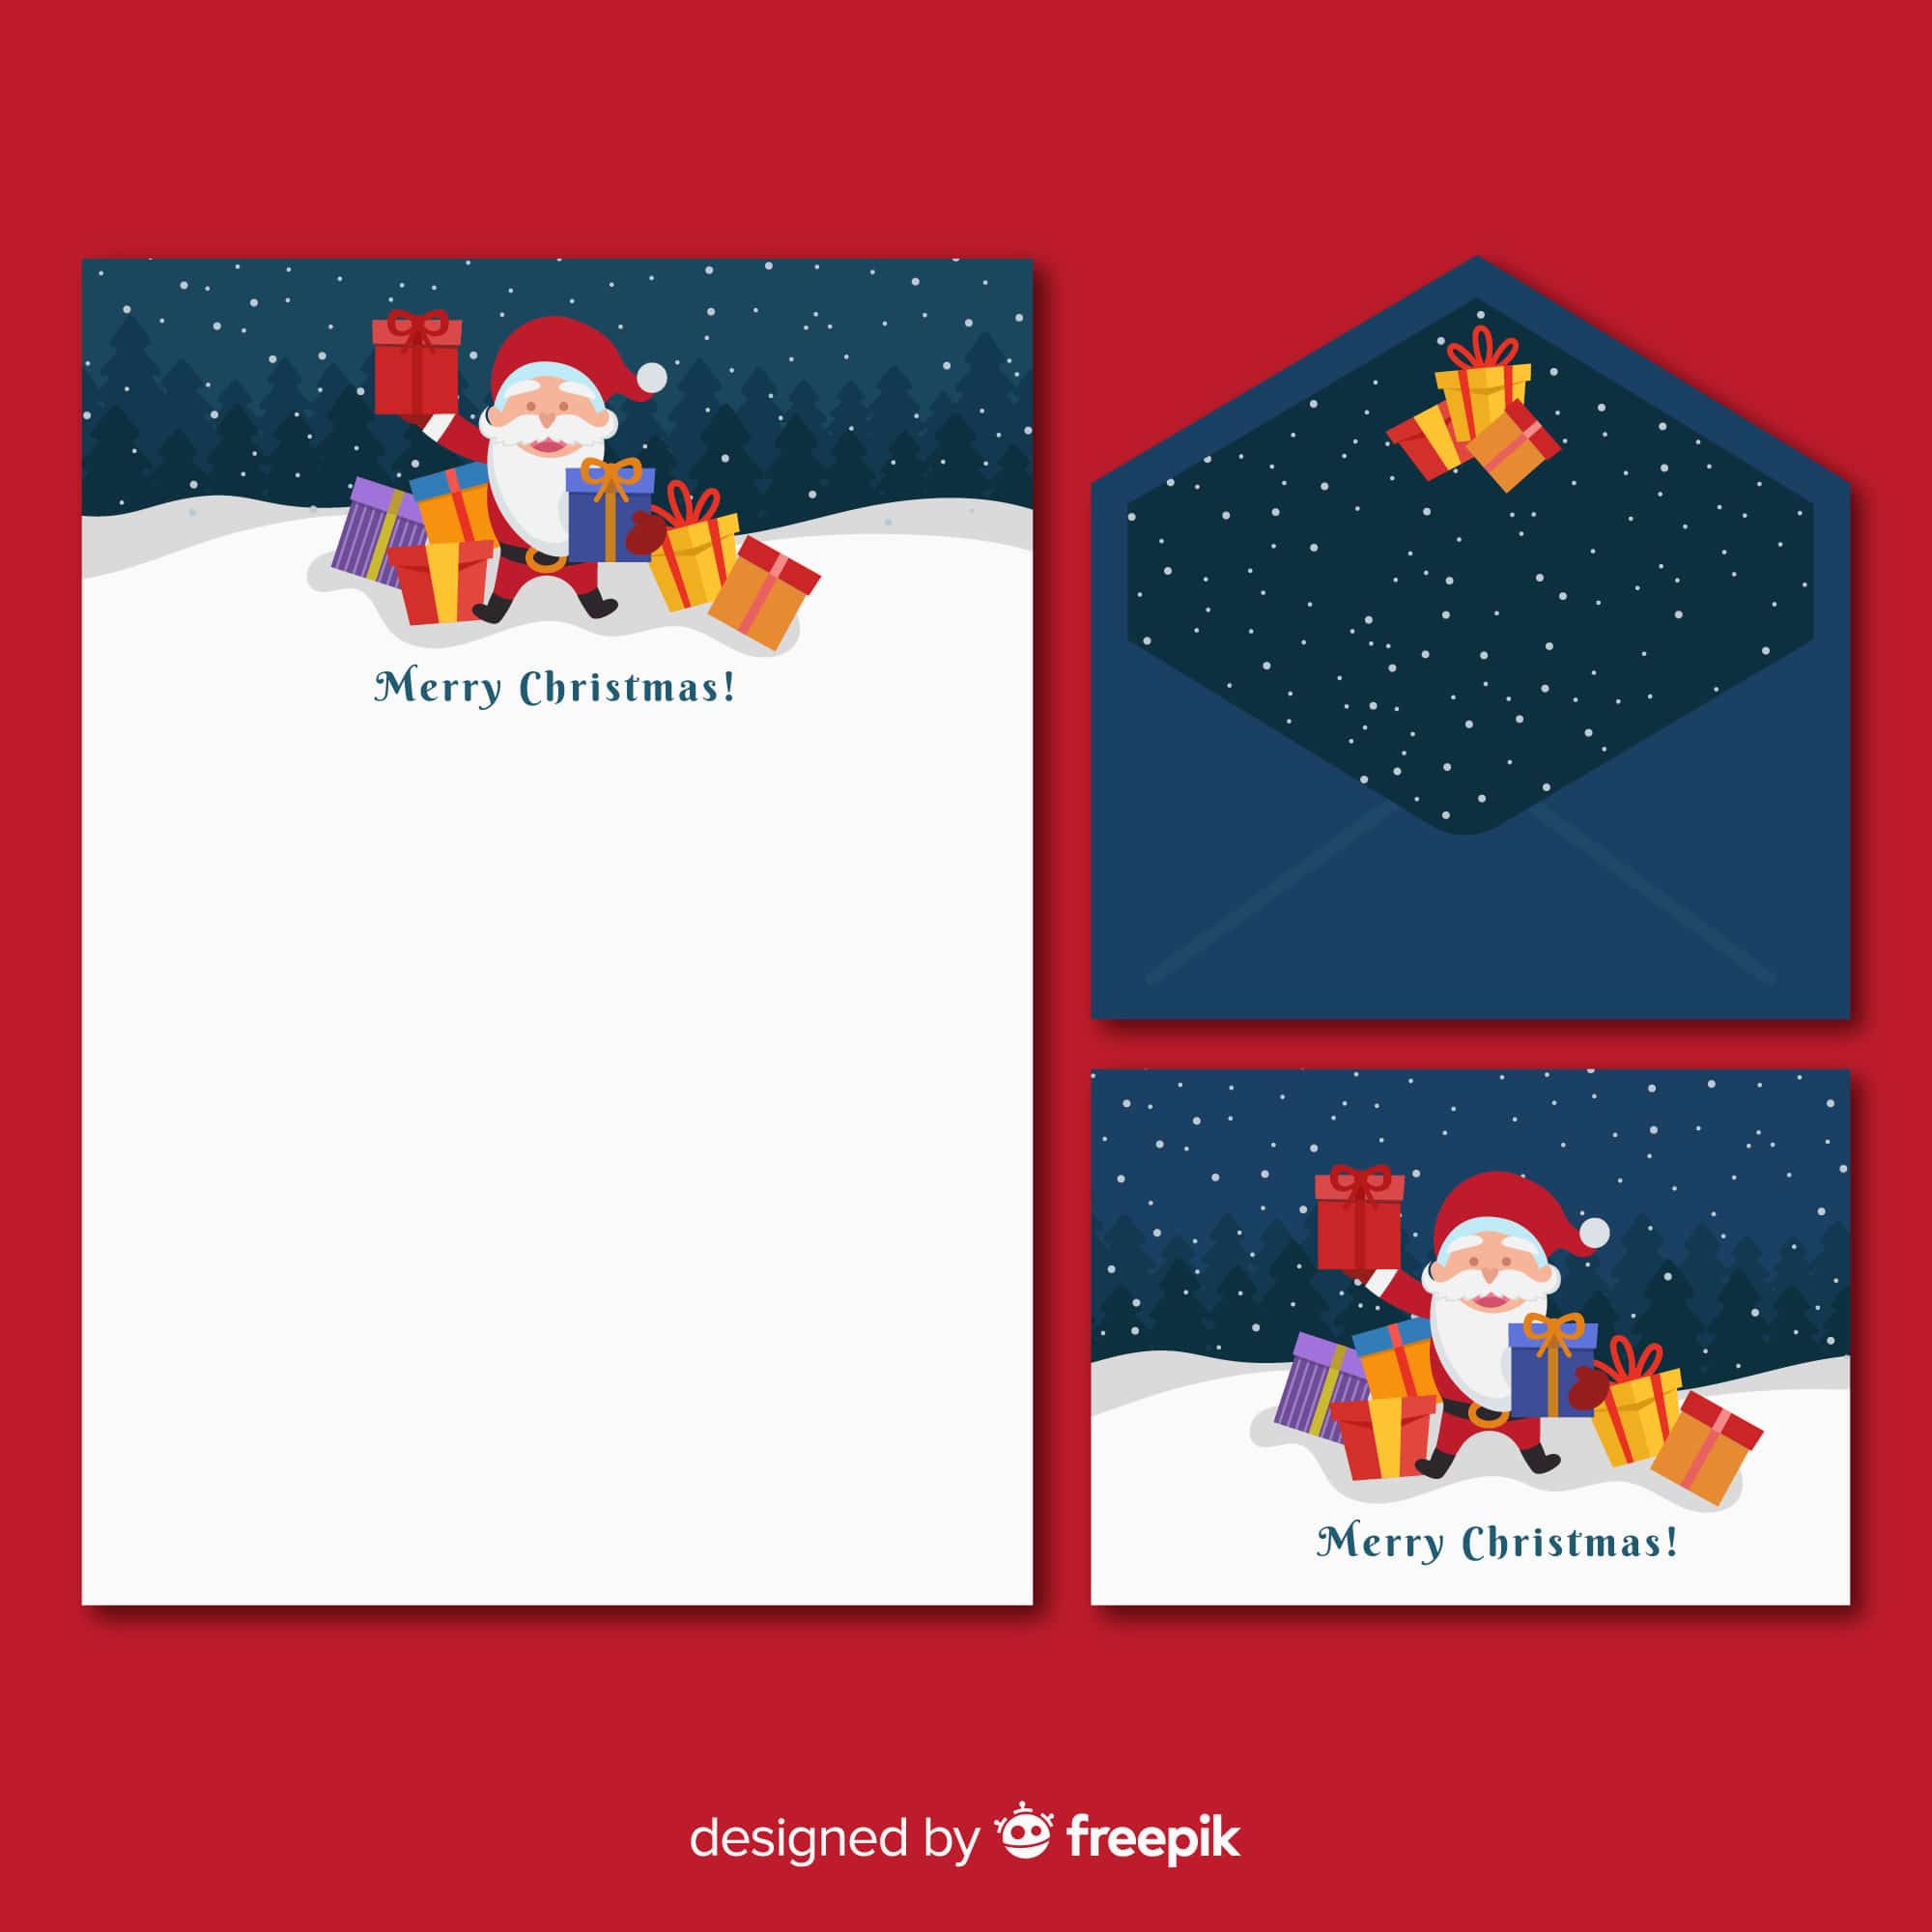 Free Printable Christmas Stationery, Writing Paper, Letter Pad